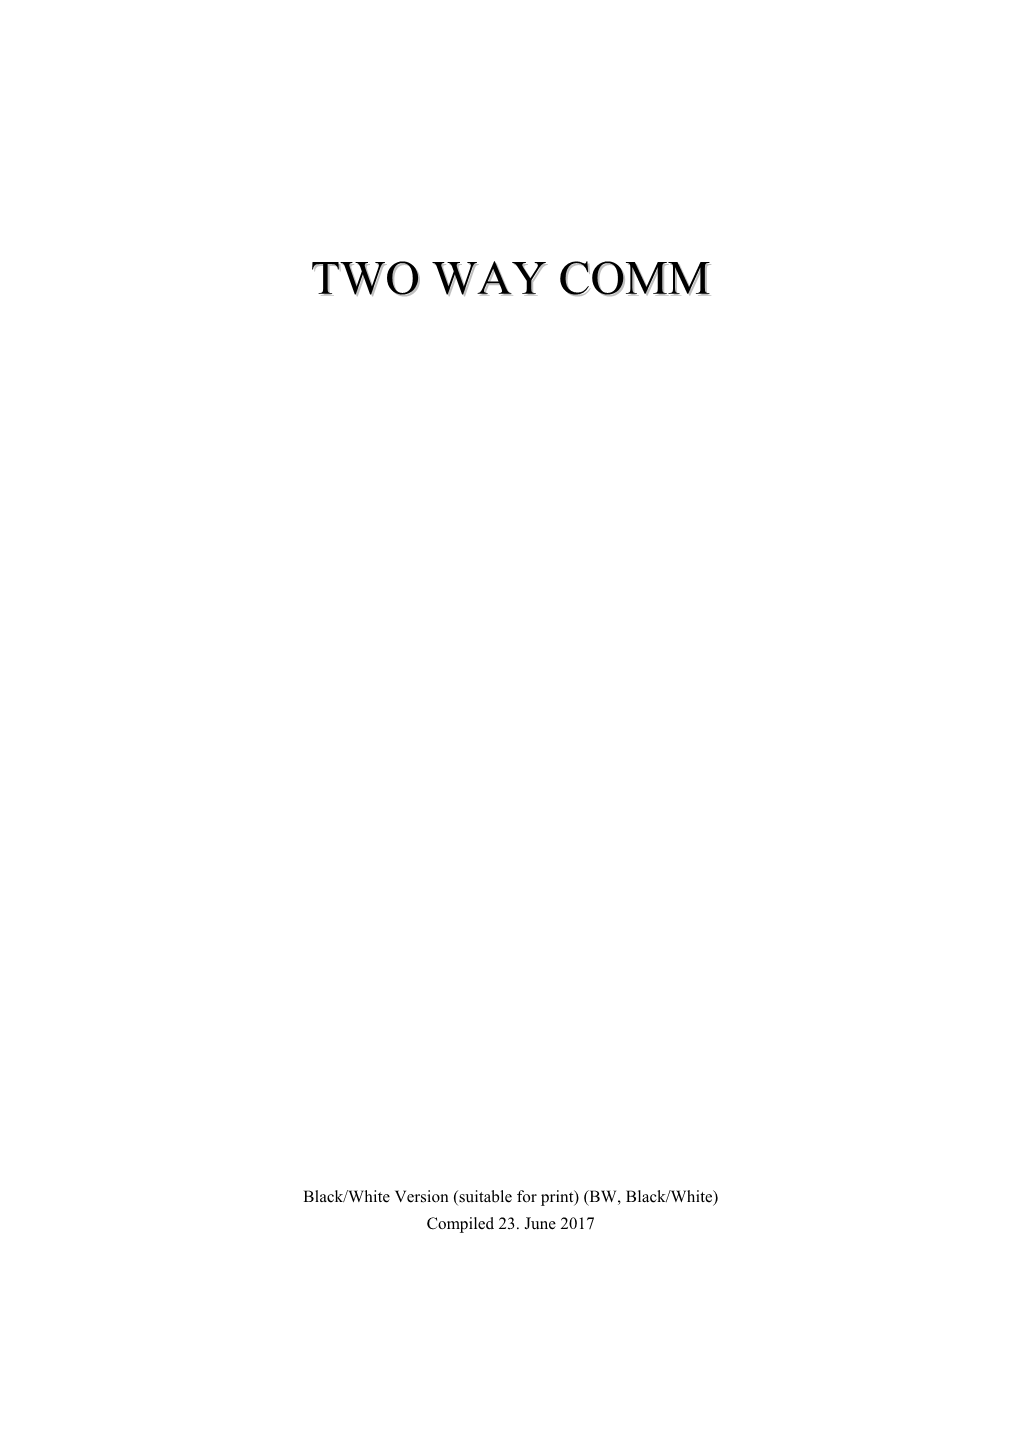 TWO WAY COMM II 23.06.17 A) Table of Contents, in Checksheet Order